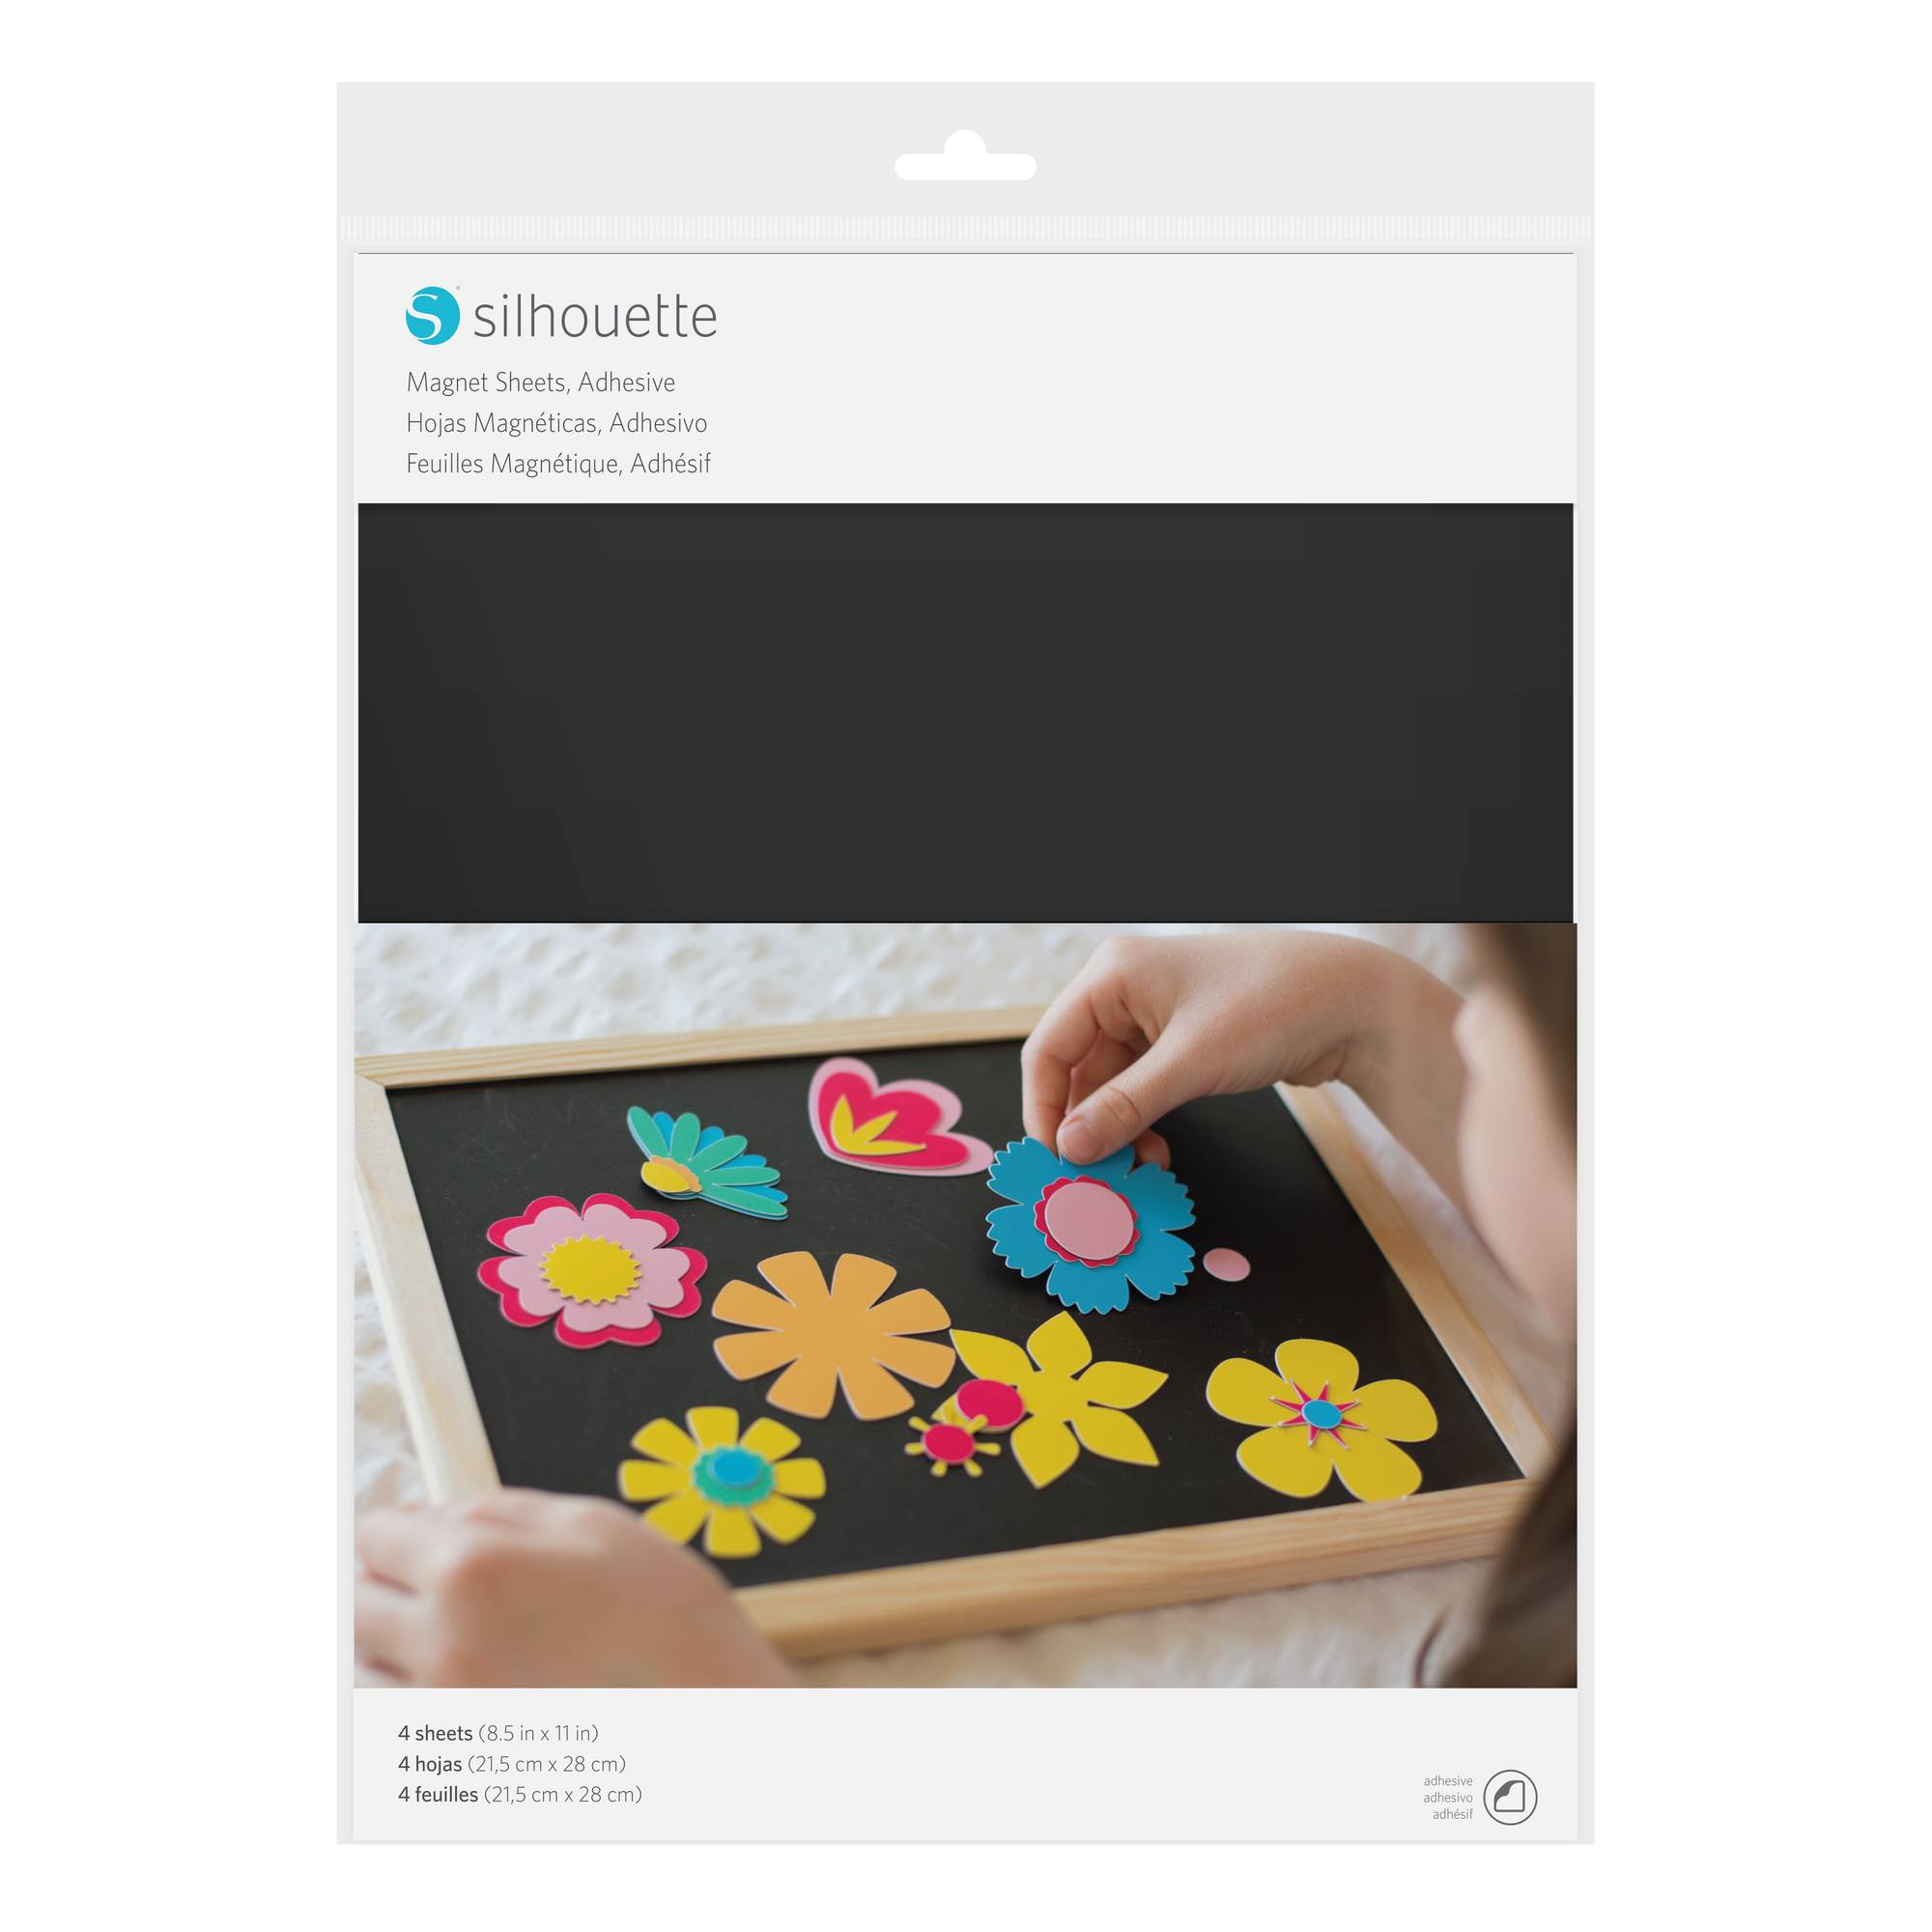 Feuille adhesive puzzle - Cdiscount